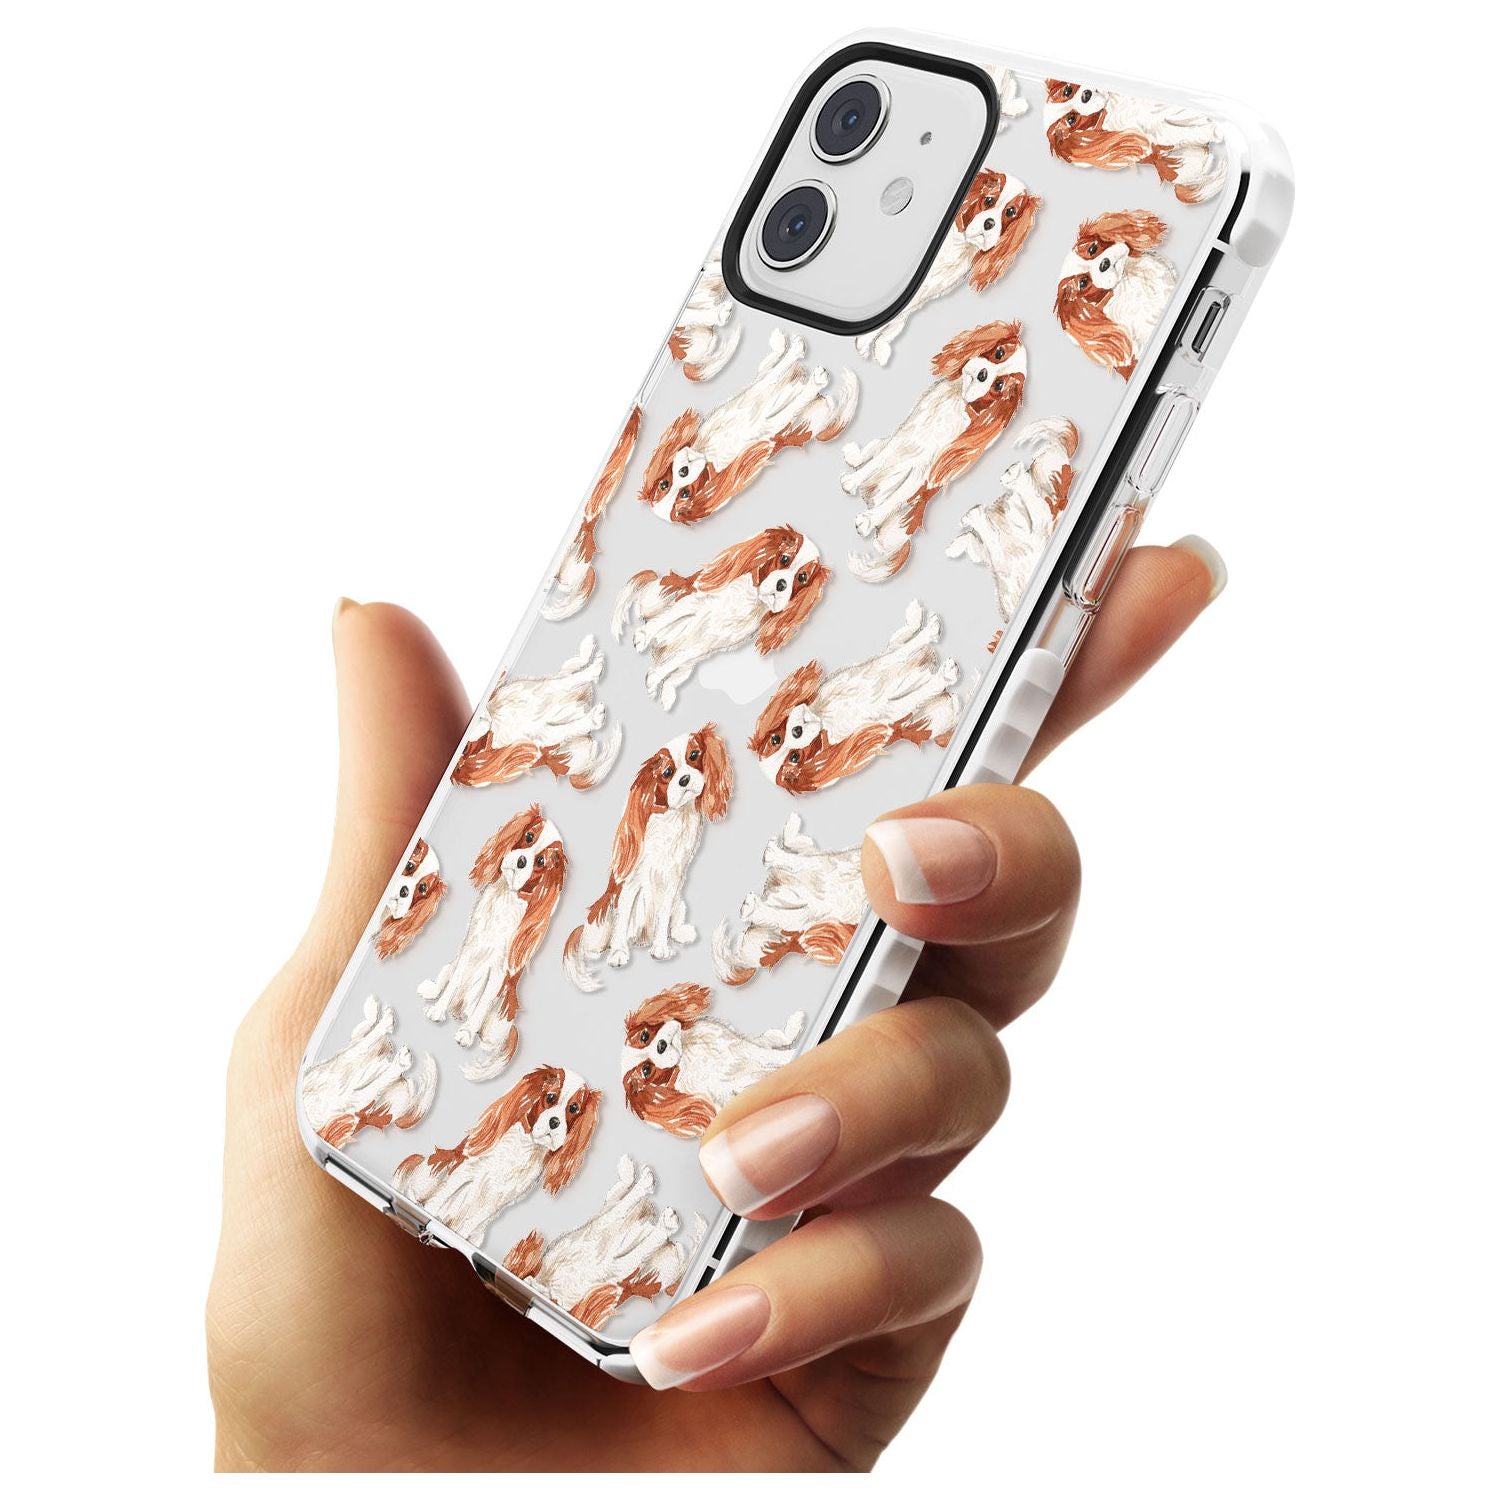 Cavalier King Charles Spaniel Dog Pattern Impact Phone Case for iPhone 11